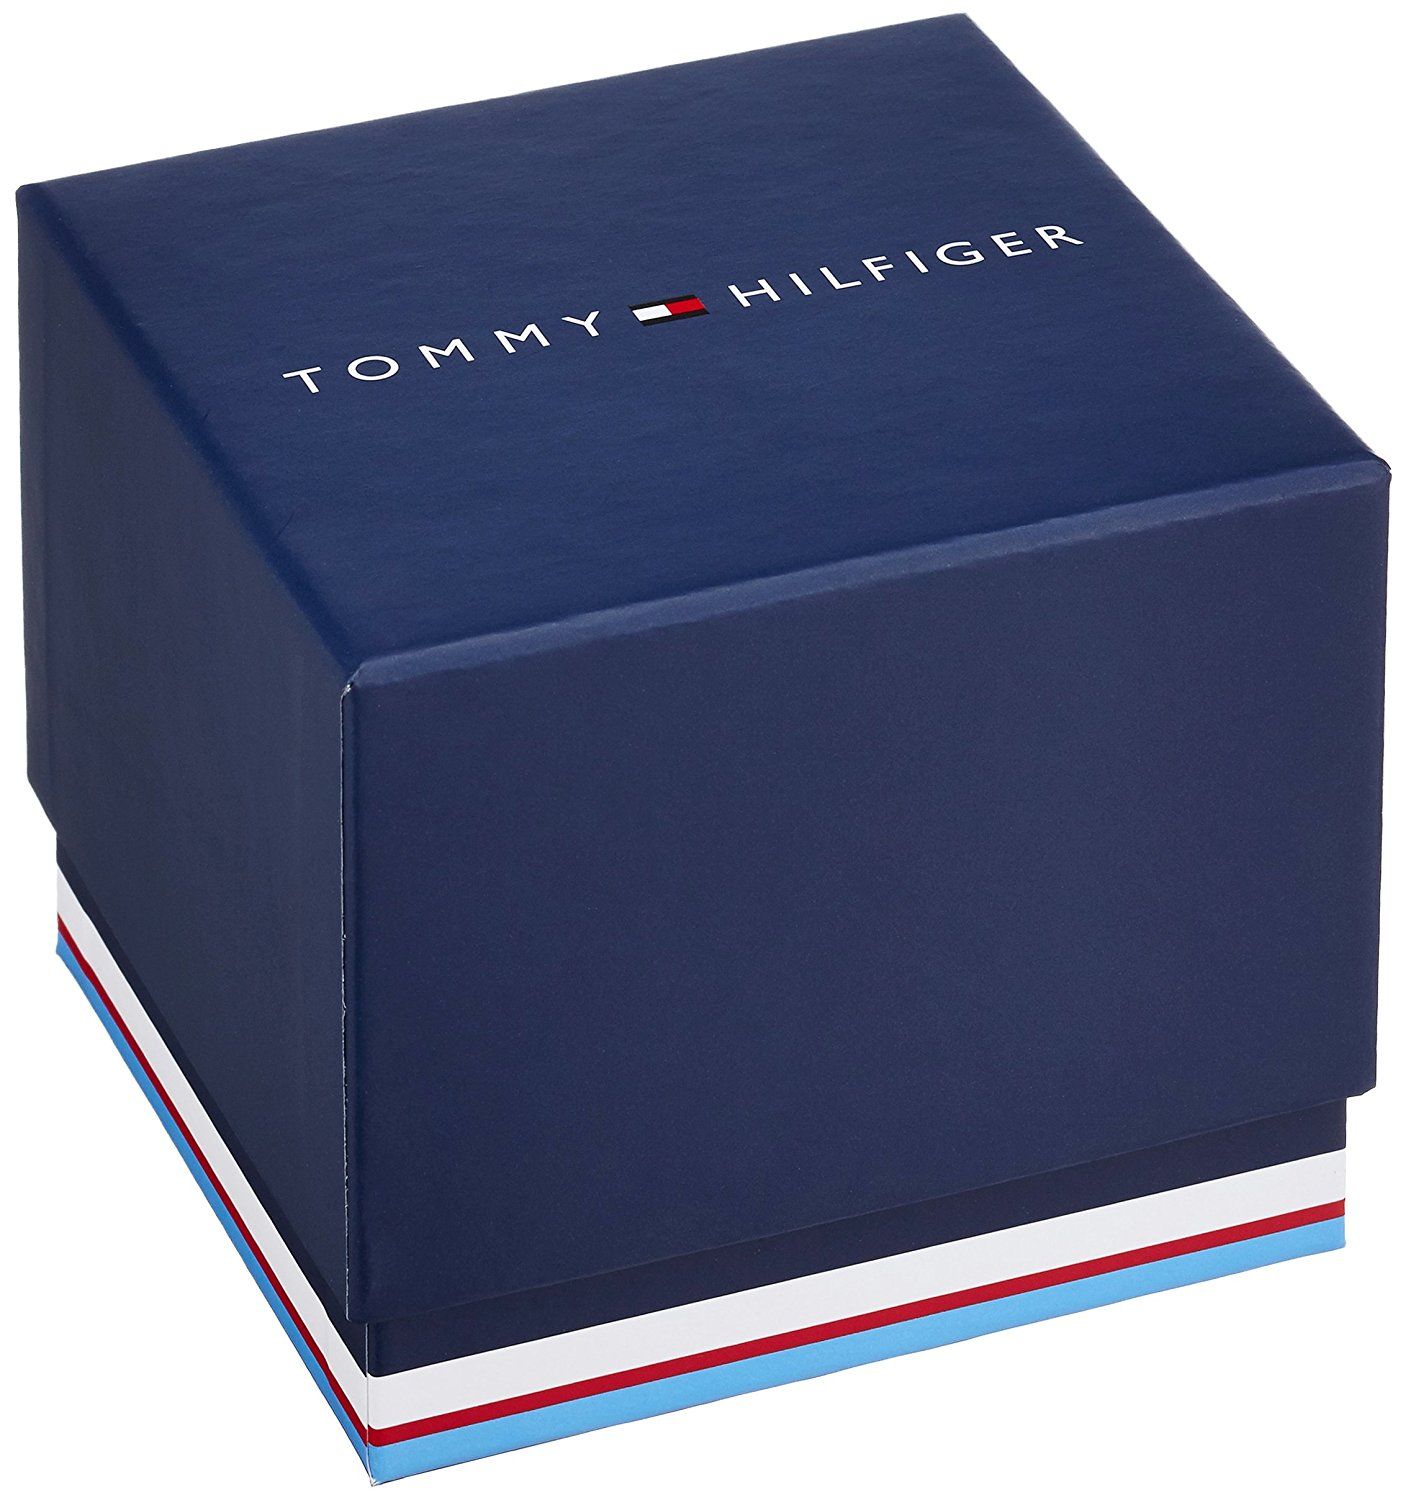 This Tommy Hilfiger Baker Multi Dial Watch for Men is the perfect timepiece to wear or to gift. It's Silver 44 mm Round case combined with the comfortable Silver Stainless steel will ensure you enjoy this stunning timepiece without any compromise. Operated by a high quality Quartz movement and water resistant to 5 bars, your watch will keep ticking. This watch is suitable for every occasion, whether you are at work, leisure or at the banquet and so on. -The watch has a calendar function: Day-Date, 24-hour Display. High quality 21 cm length and 20 mm width. Silver Stainless steel strap with a Fold over with push button clasp. Case diameter: 44 mm, case thickness: 10 mm, case colour: Silver and dial colour: Blue